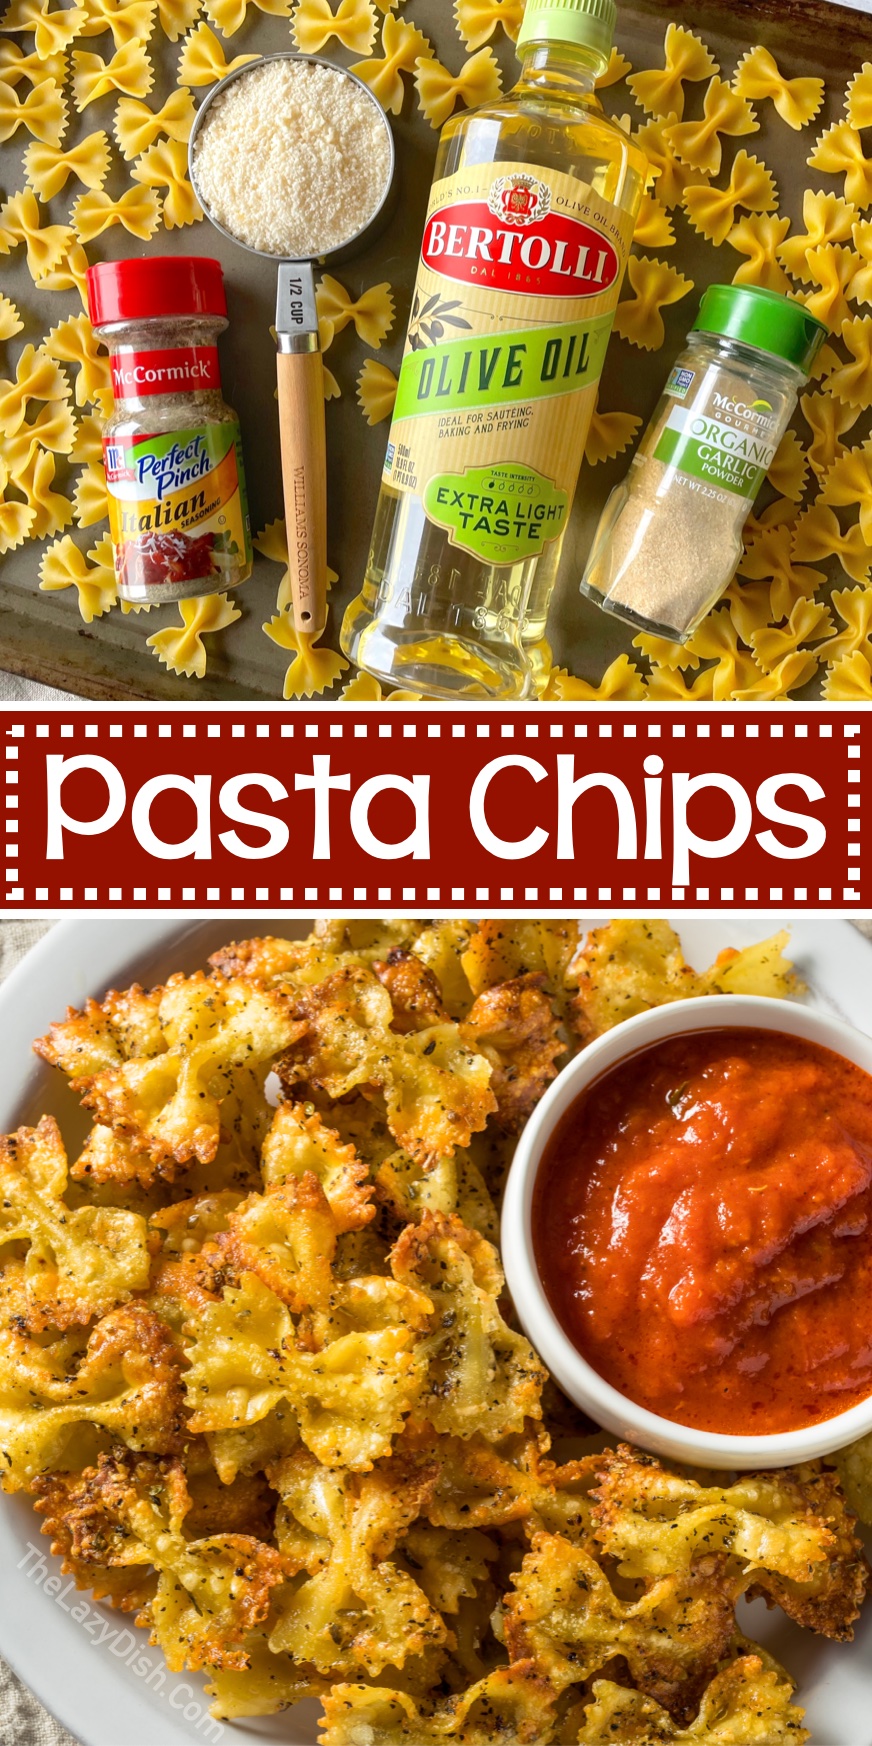 Easy Pasta Chips Recipe | A fun and easy snack idea! I'm always looking for unique recipes to make for my family, and these oven baked bow tie pasta chips are a hit! Serve with warm marinara, and thank me later. 